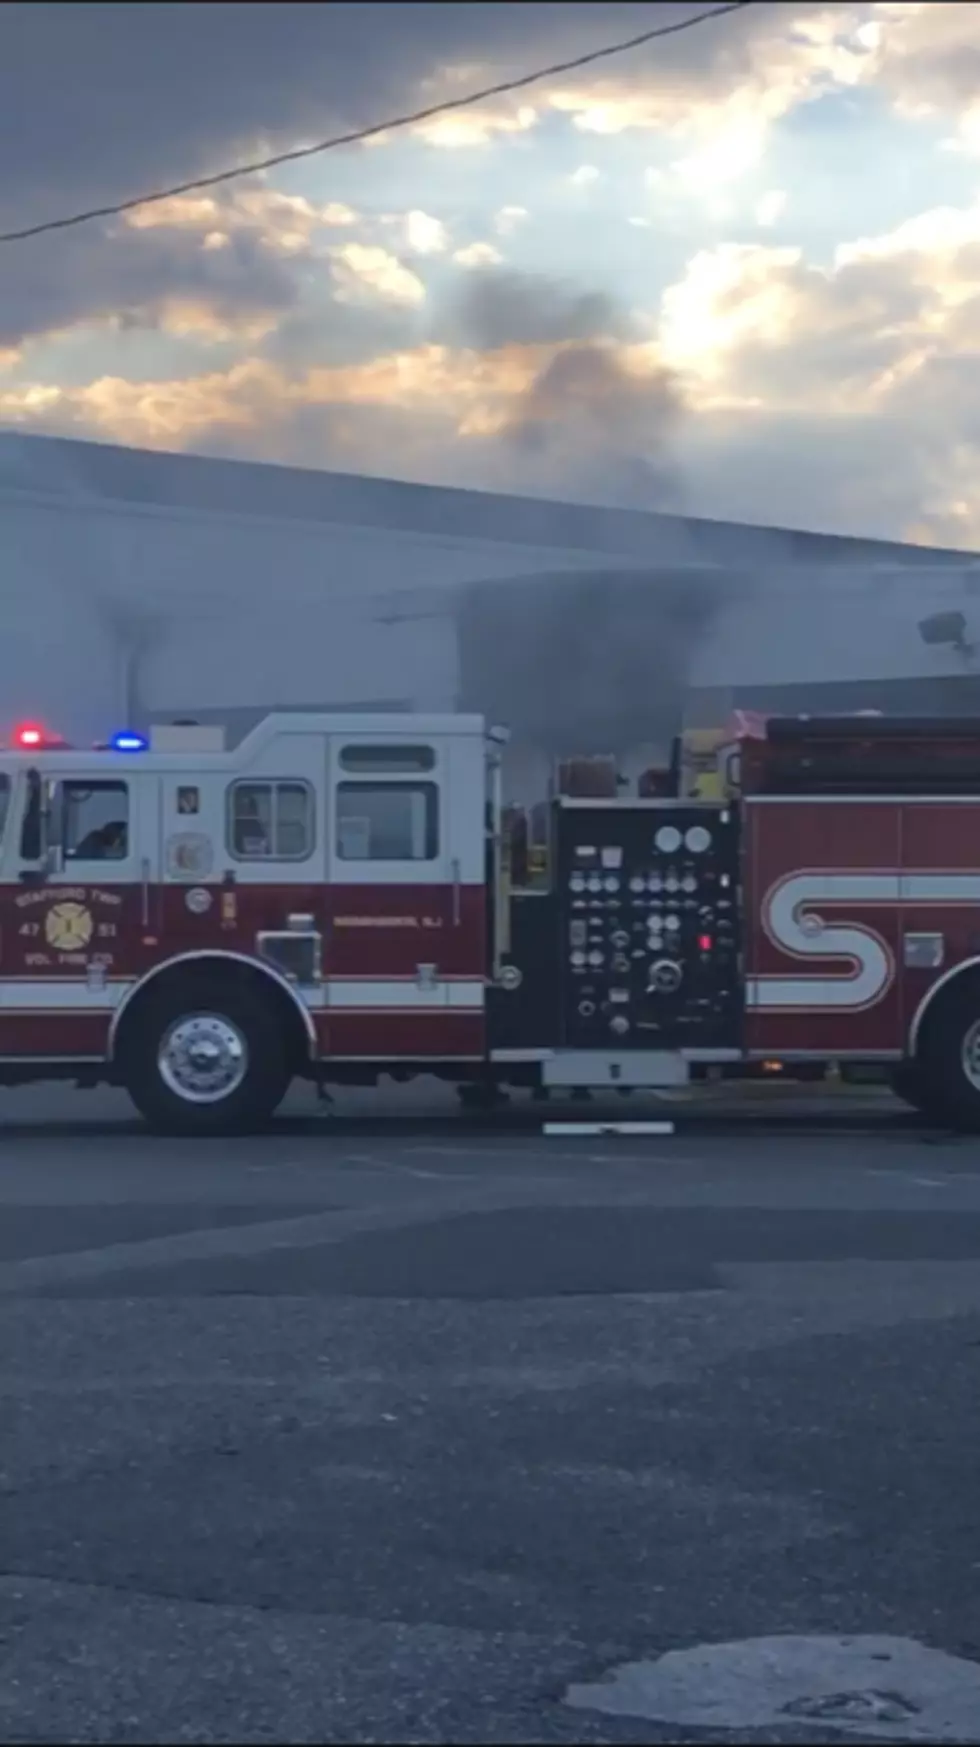 Universal Supply Company fire has been ruled accidental